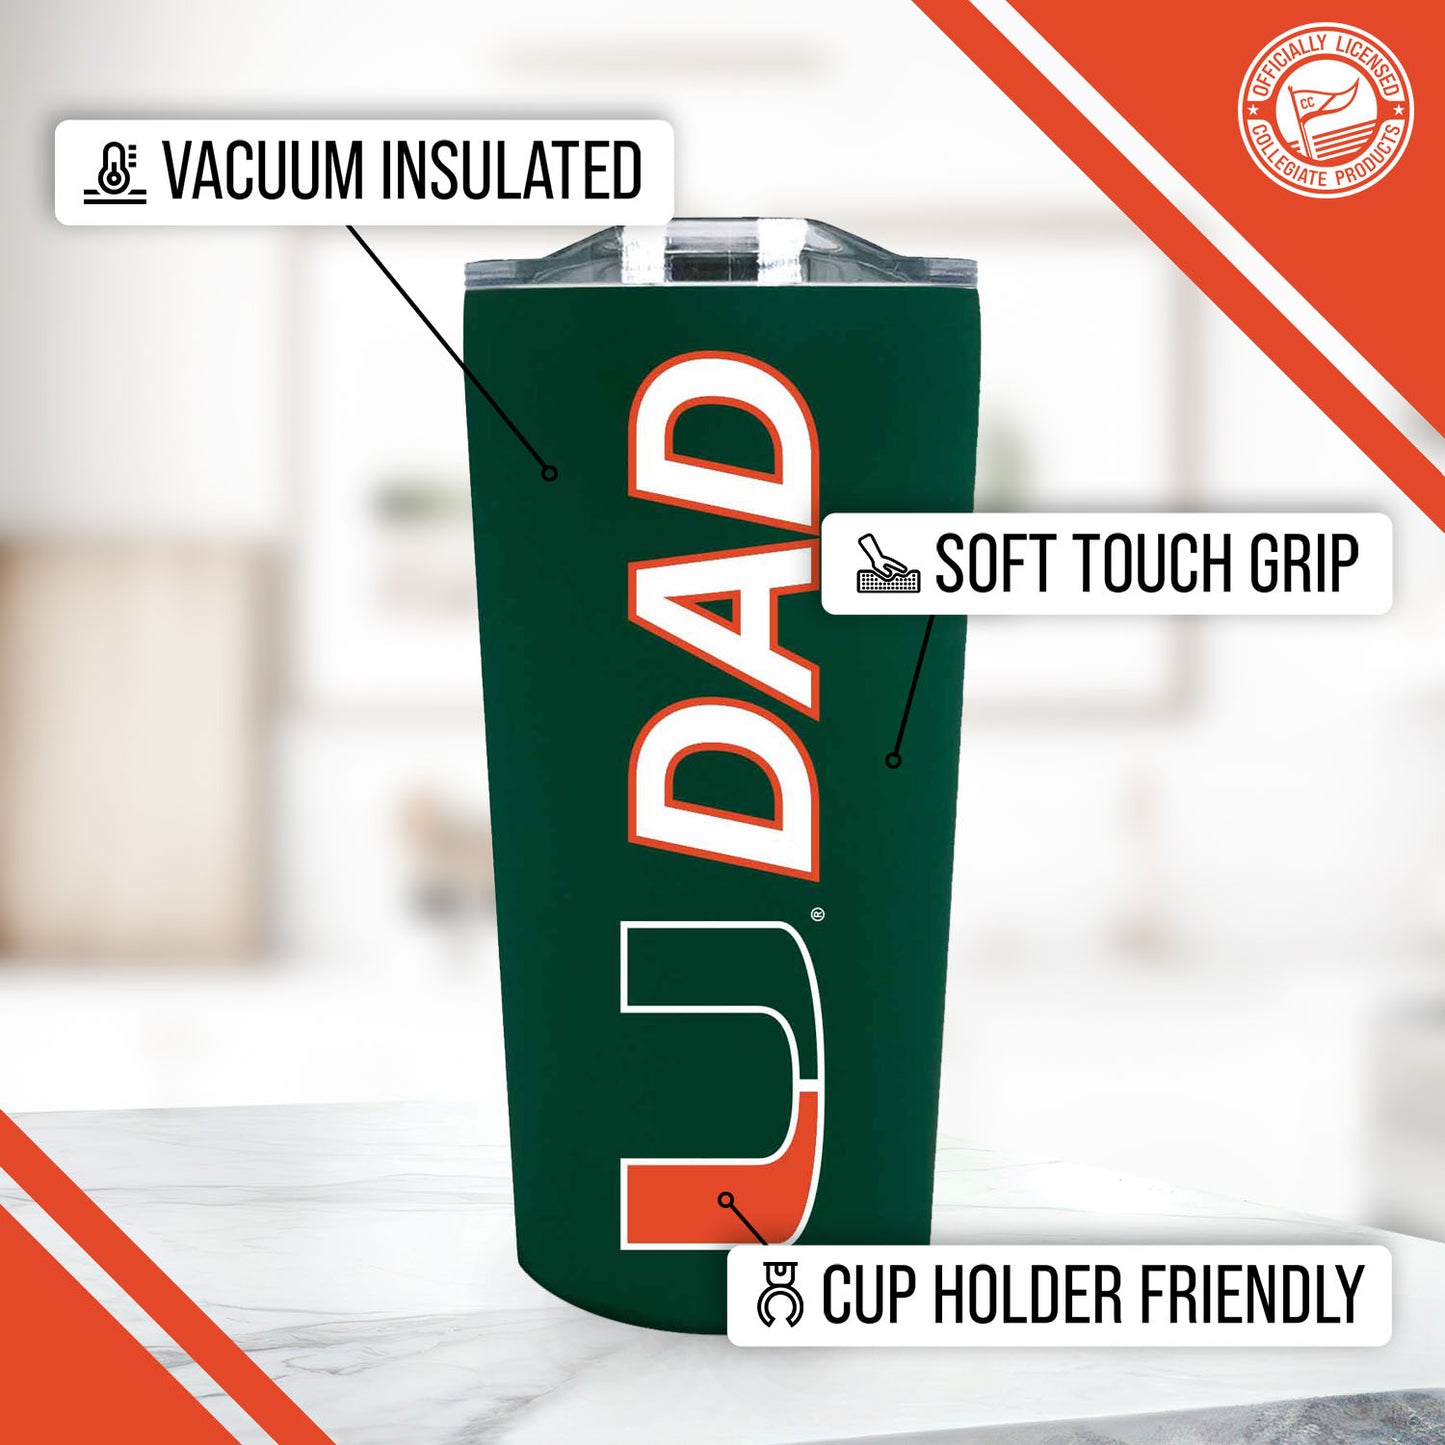 Miami Hurricanes NCAA Stainless Steel Travel Tumbler for Dad - Green